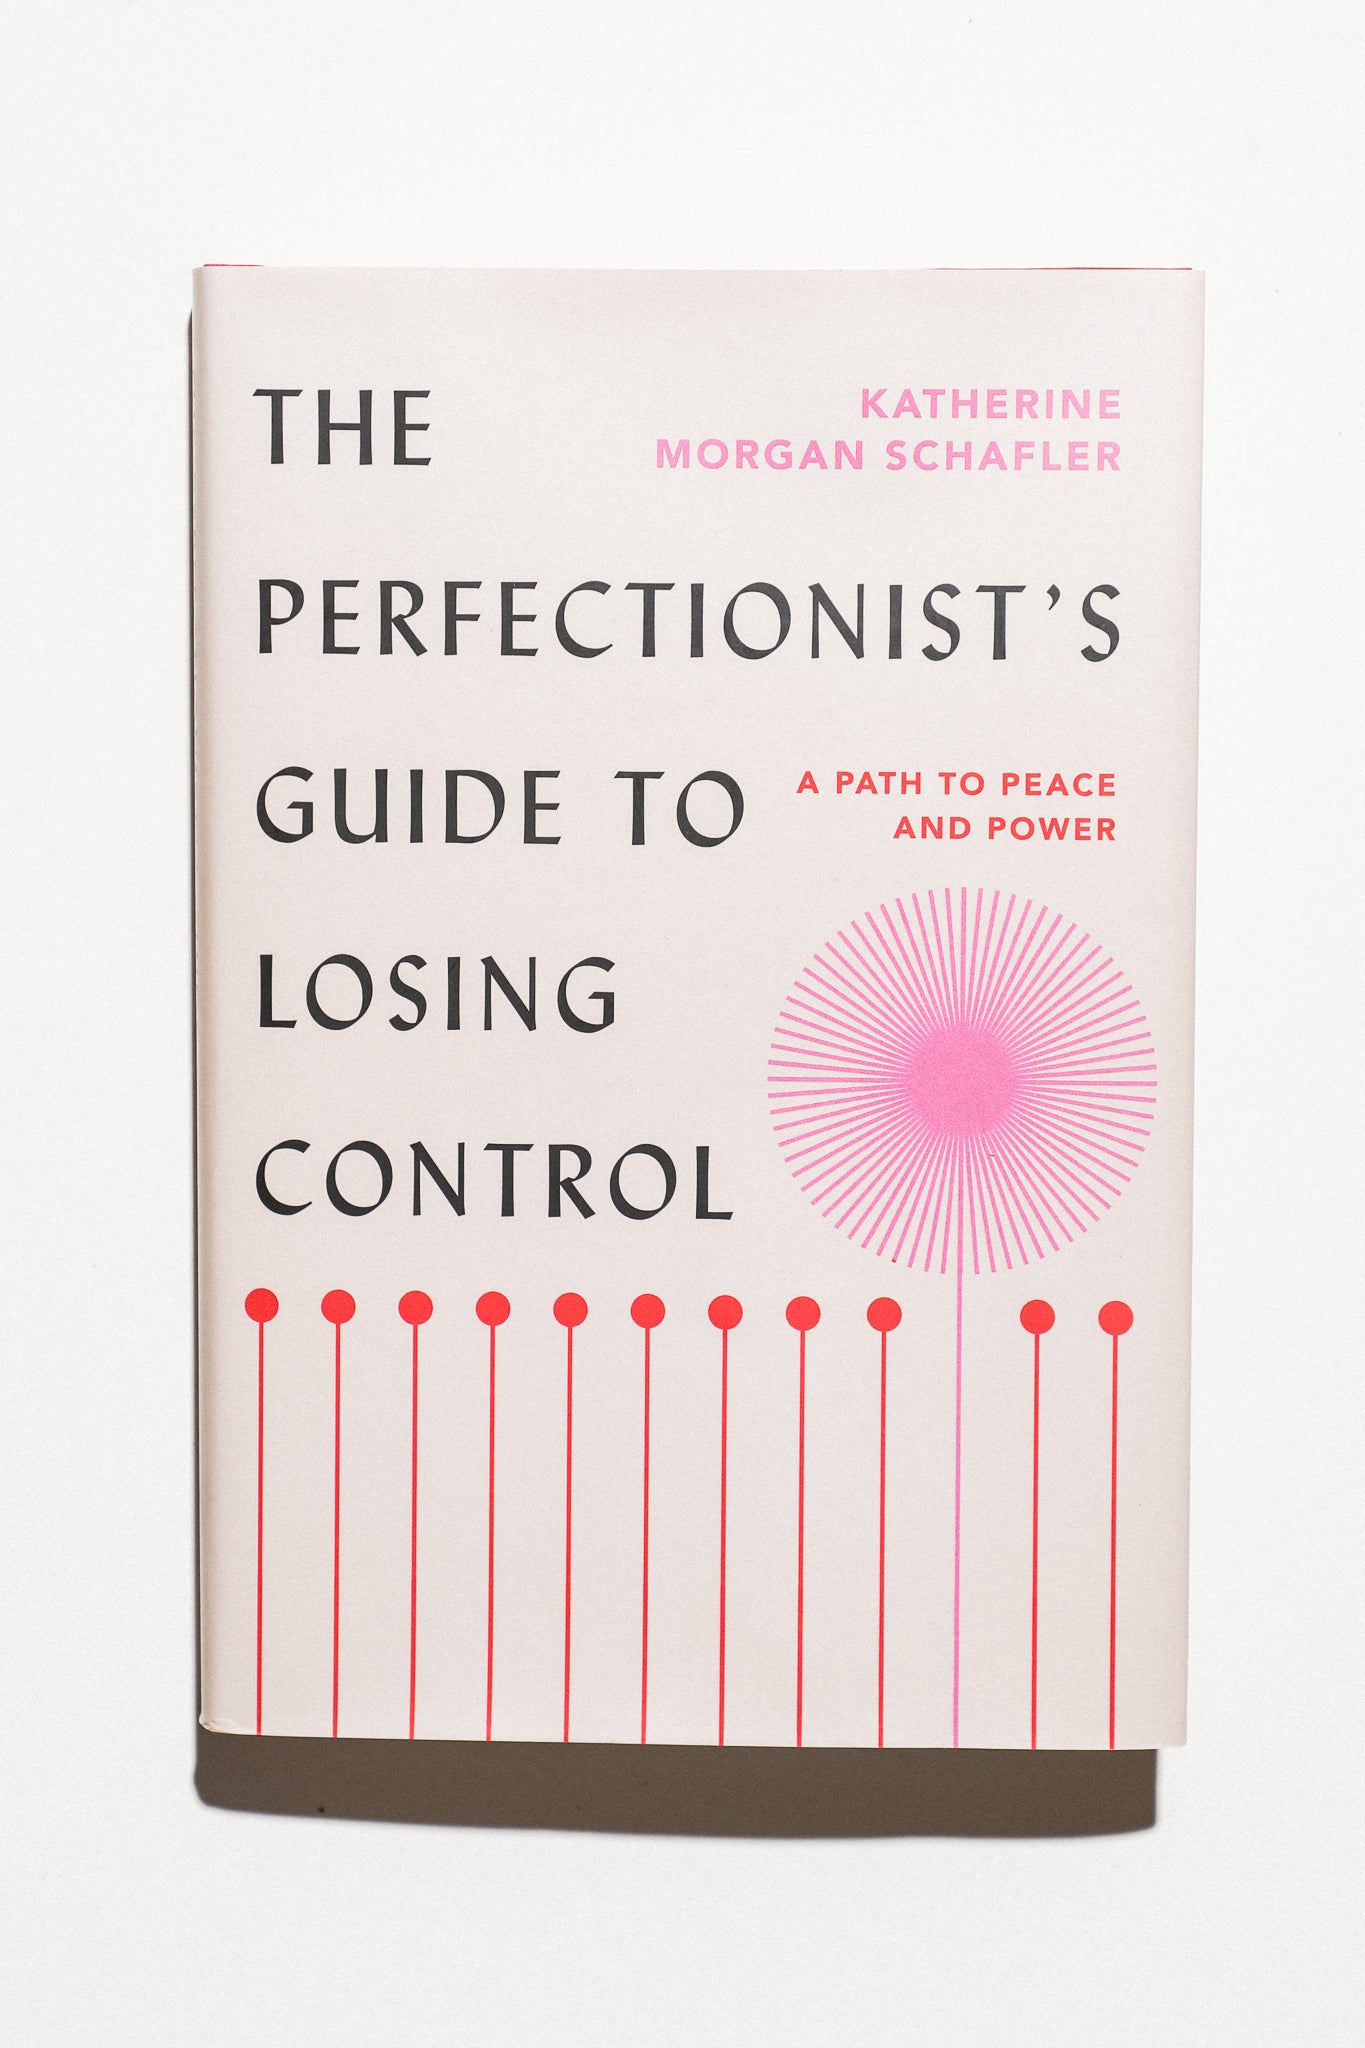 The Perfectionists Guide to Losing Control